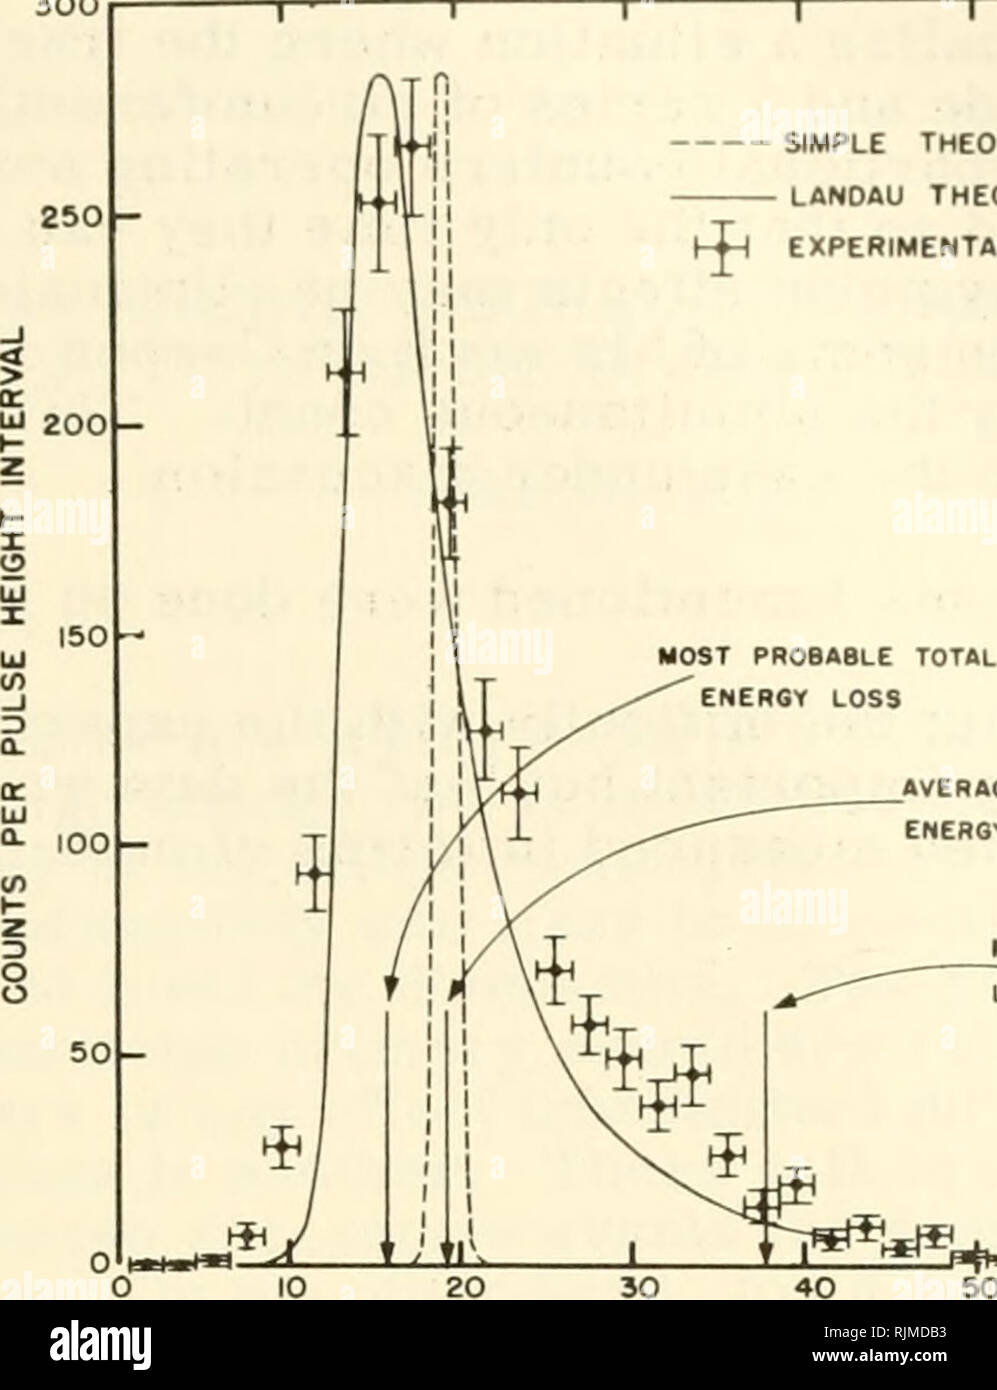 Basic mechanisms in radiobiology II. physical and chemical aspects.  proceedings of an informal conference held at Highland Park, Illinois, May  7-9, 1953. Radiobiology; Radiation Effects. 49 SIMPLE THEORY (GAUSSIAN)  LANDAU THEORY